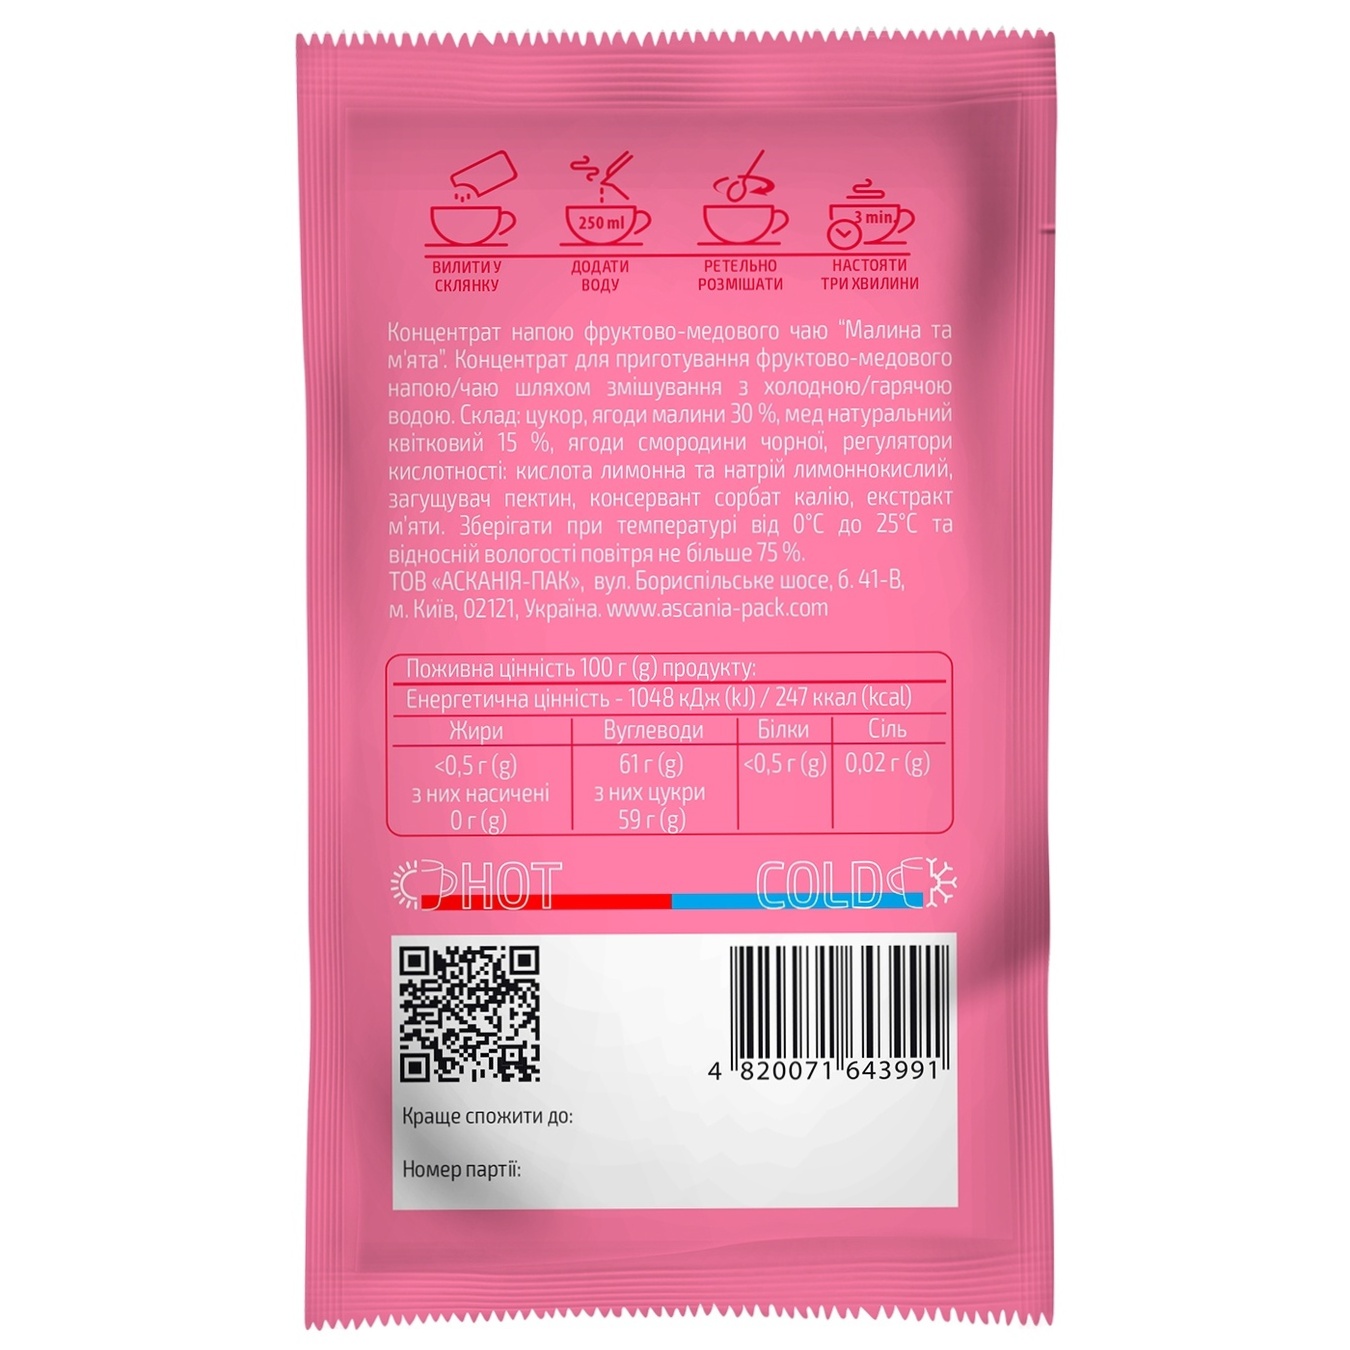 Tea sachet Askania concentrated Raspberry and mint 50g 2